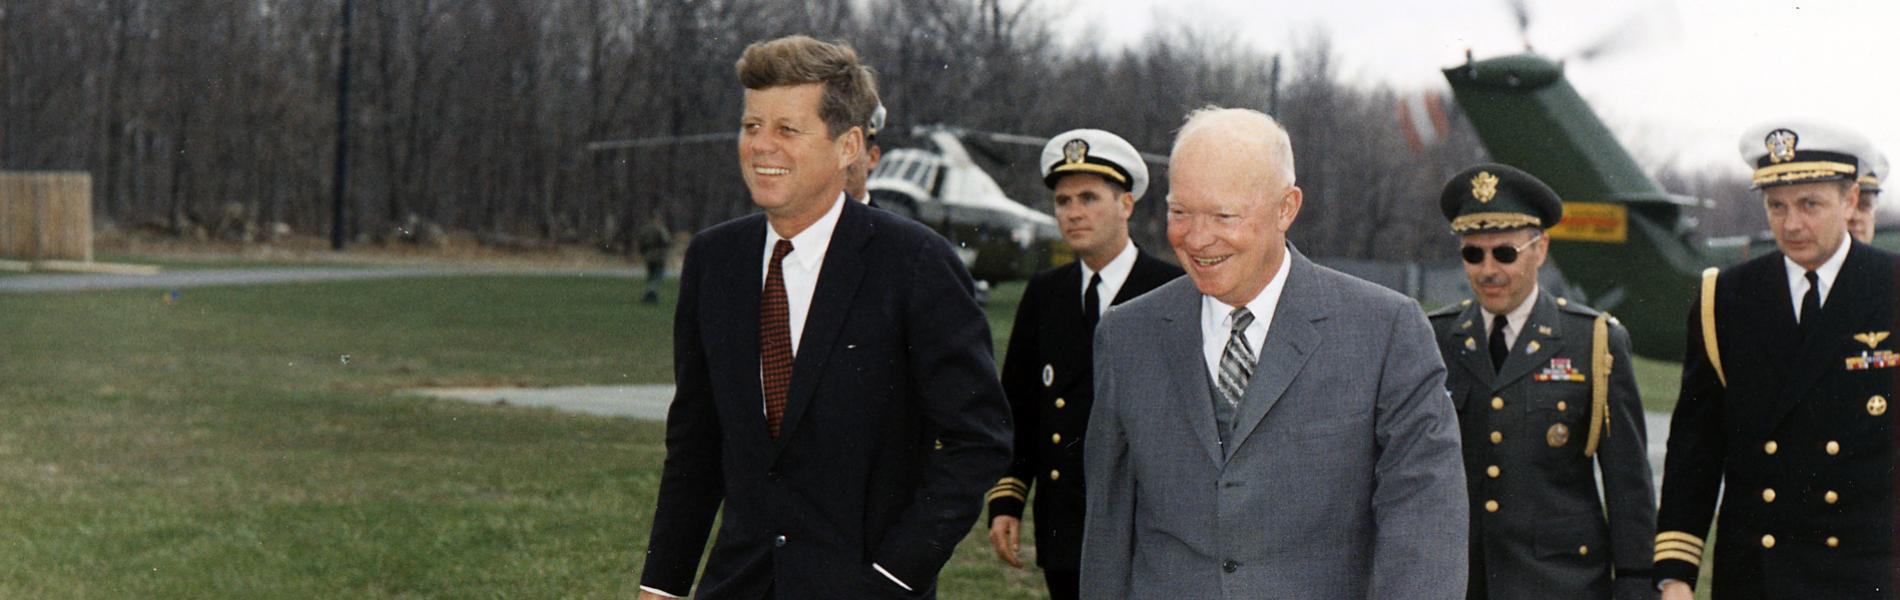 Meeting with President Eisenhower, President Kennedy, military aides, Camp David, MD